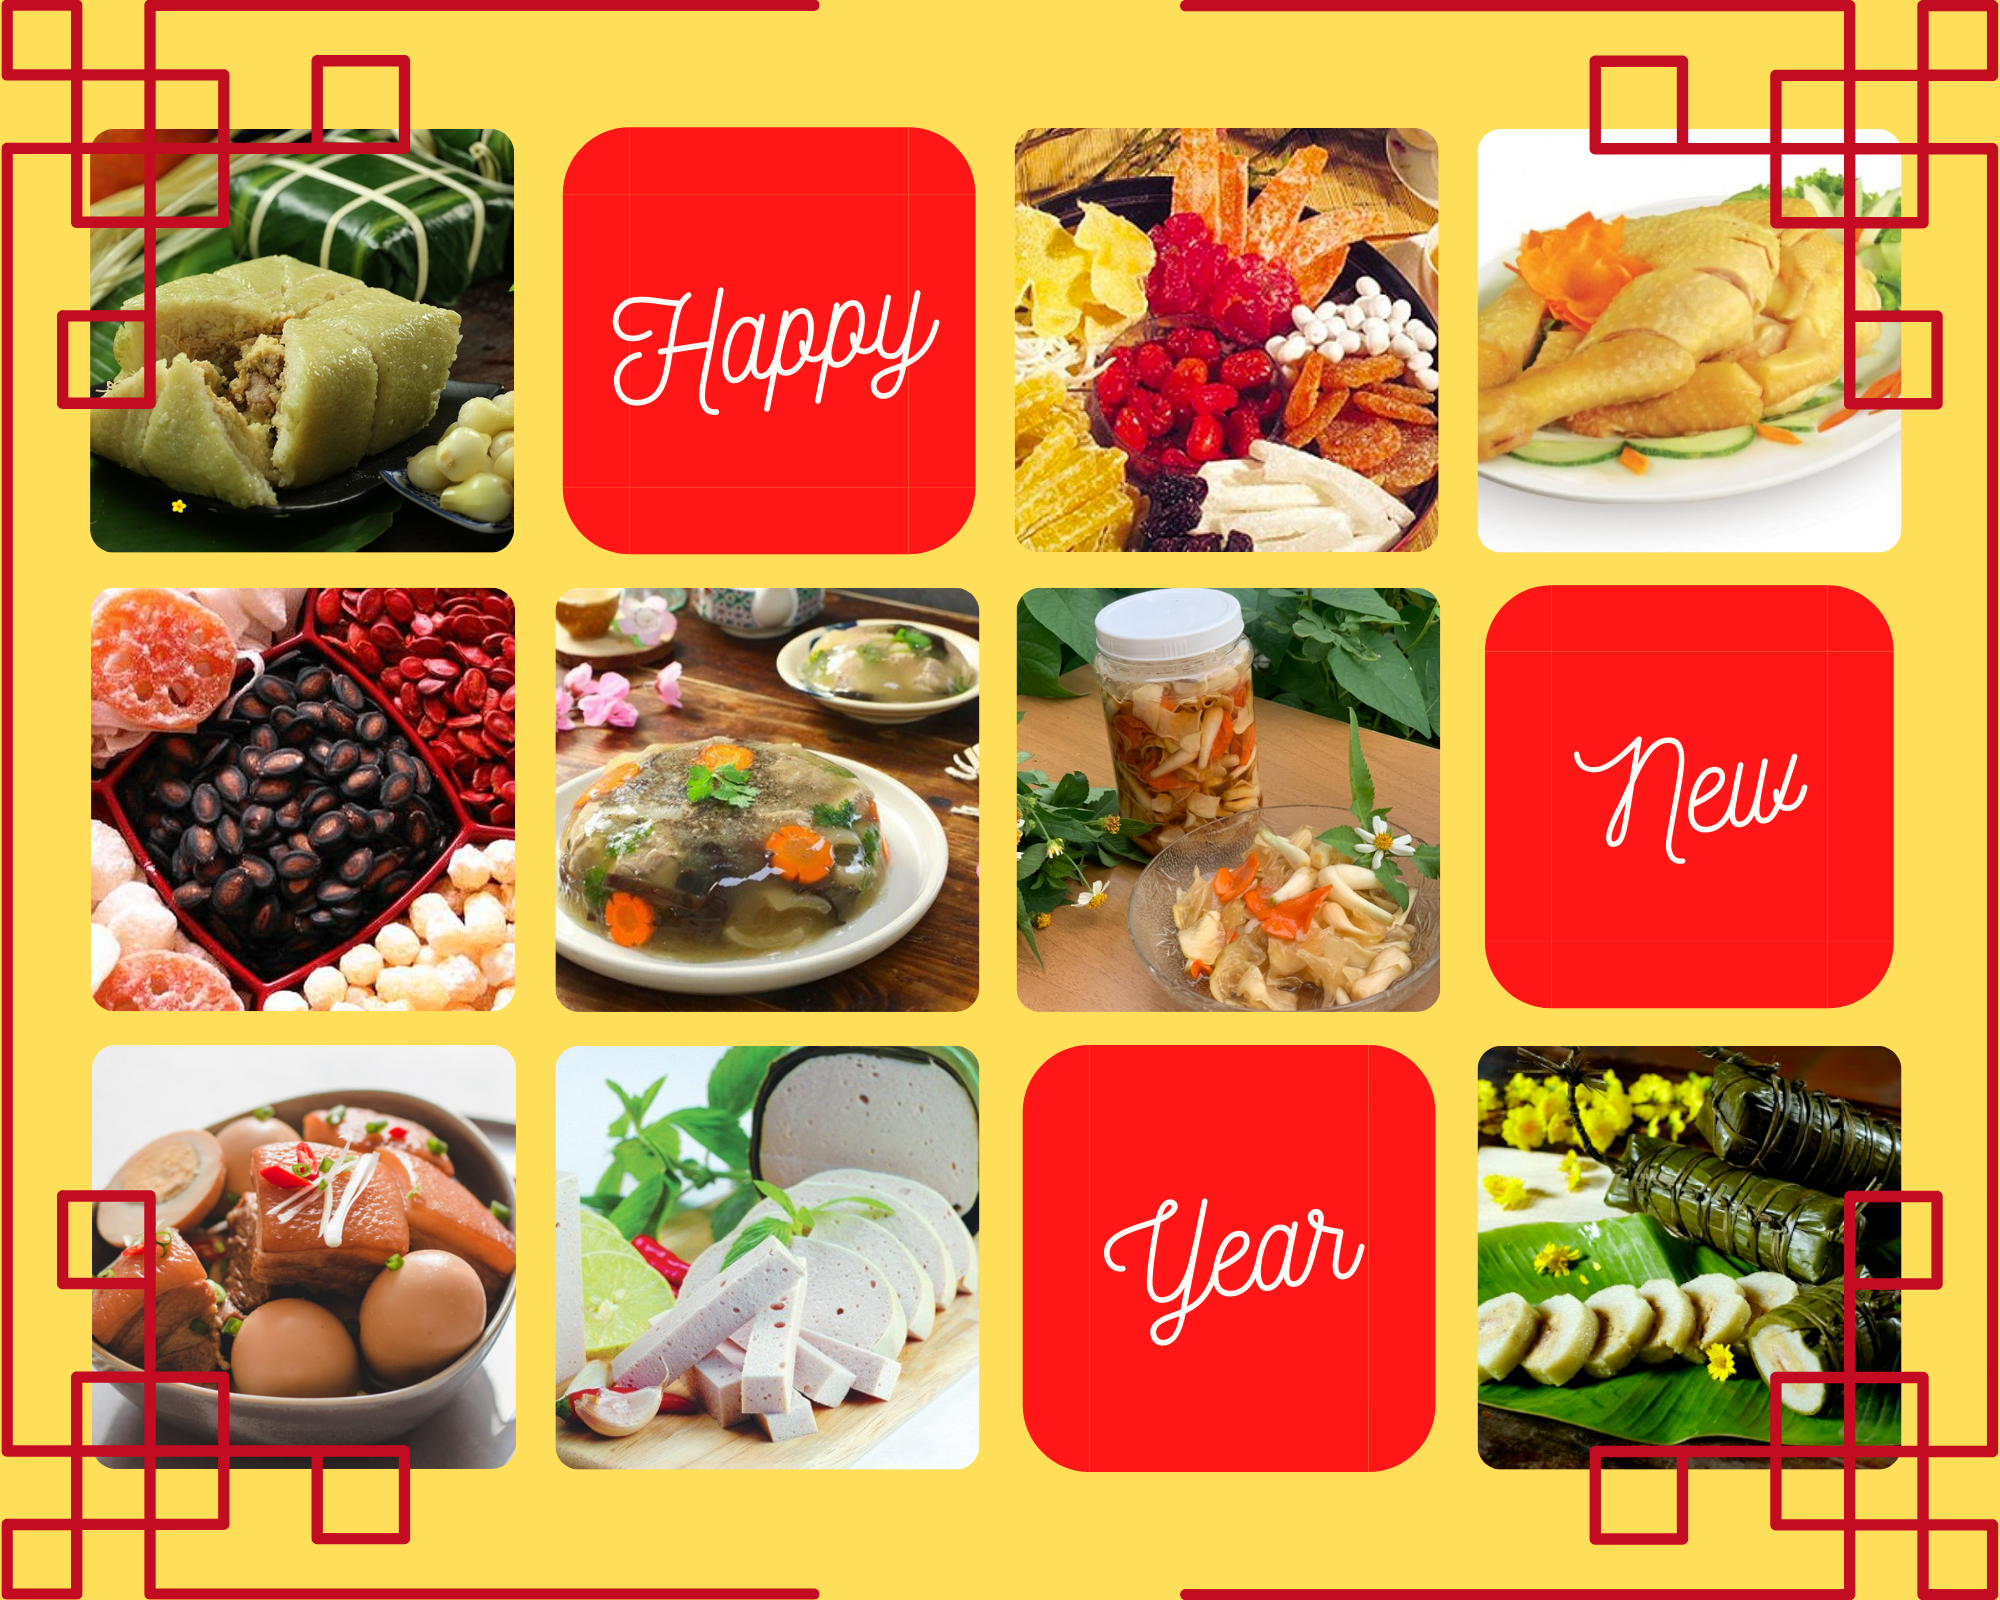 [The 7-day Tet series] Day 5 – The Meaning Of Vietnamese Traditional Dishes In Tet Holiday